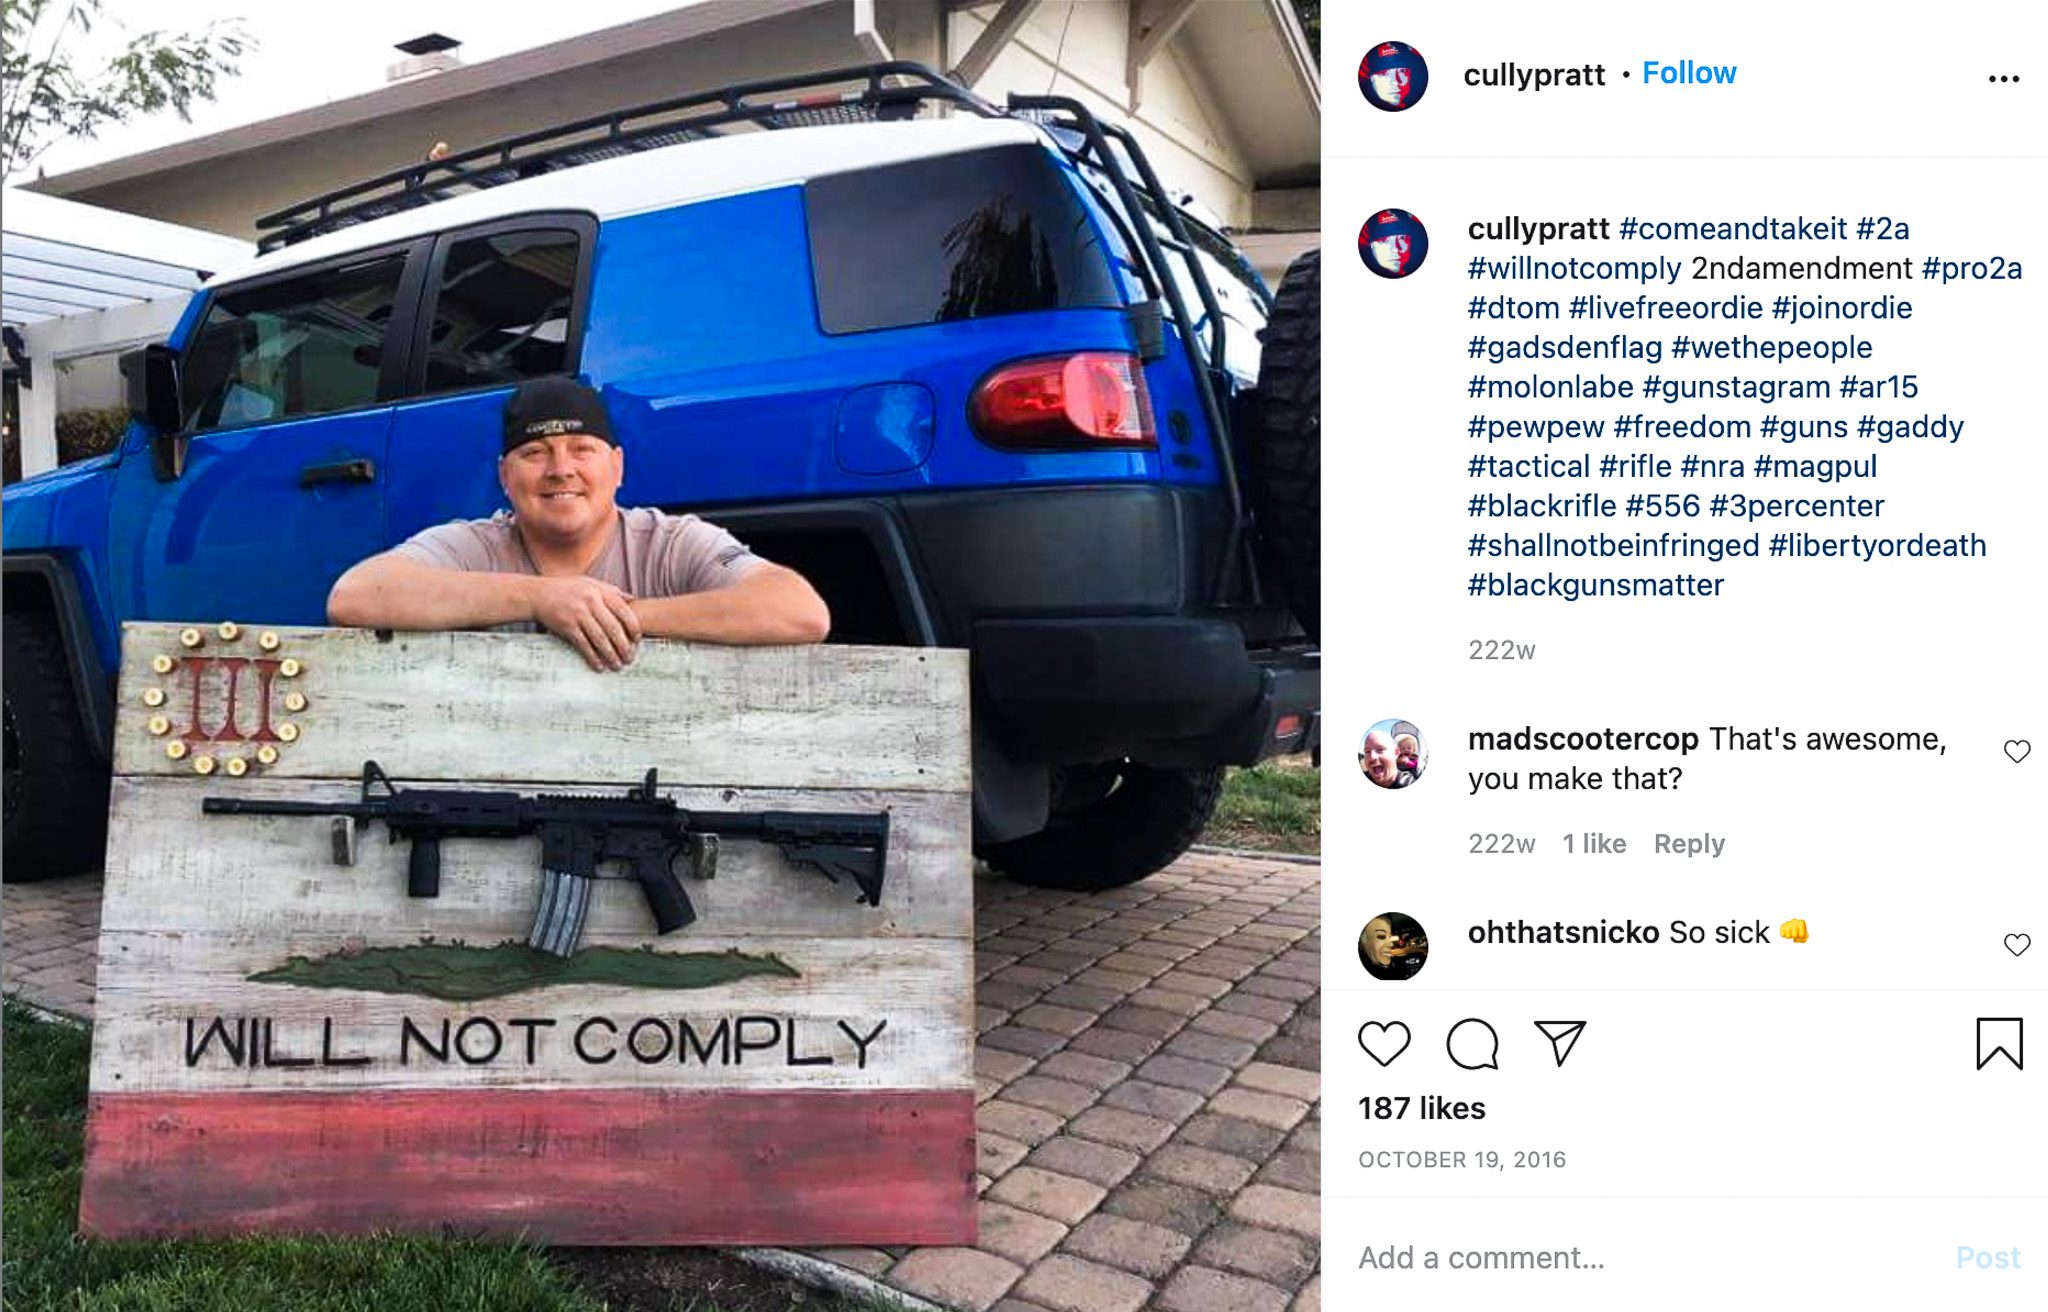 Solano County Sheriff's Sgt. Cully Pratt poses in a driveway with a Three Percenter-themed rifle display rack he made for his colleague, Sgt. Roy Stockton. A black AR-15 semiautomatic rifle is mounted on the rack.